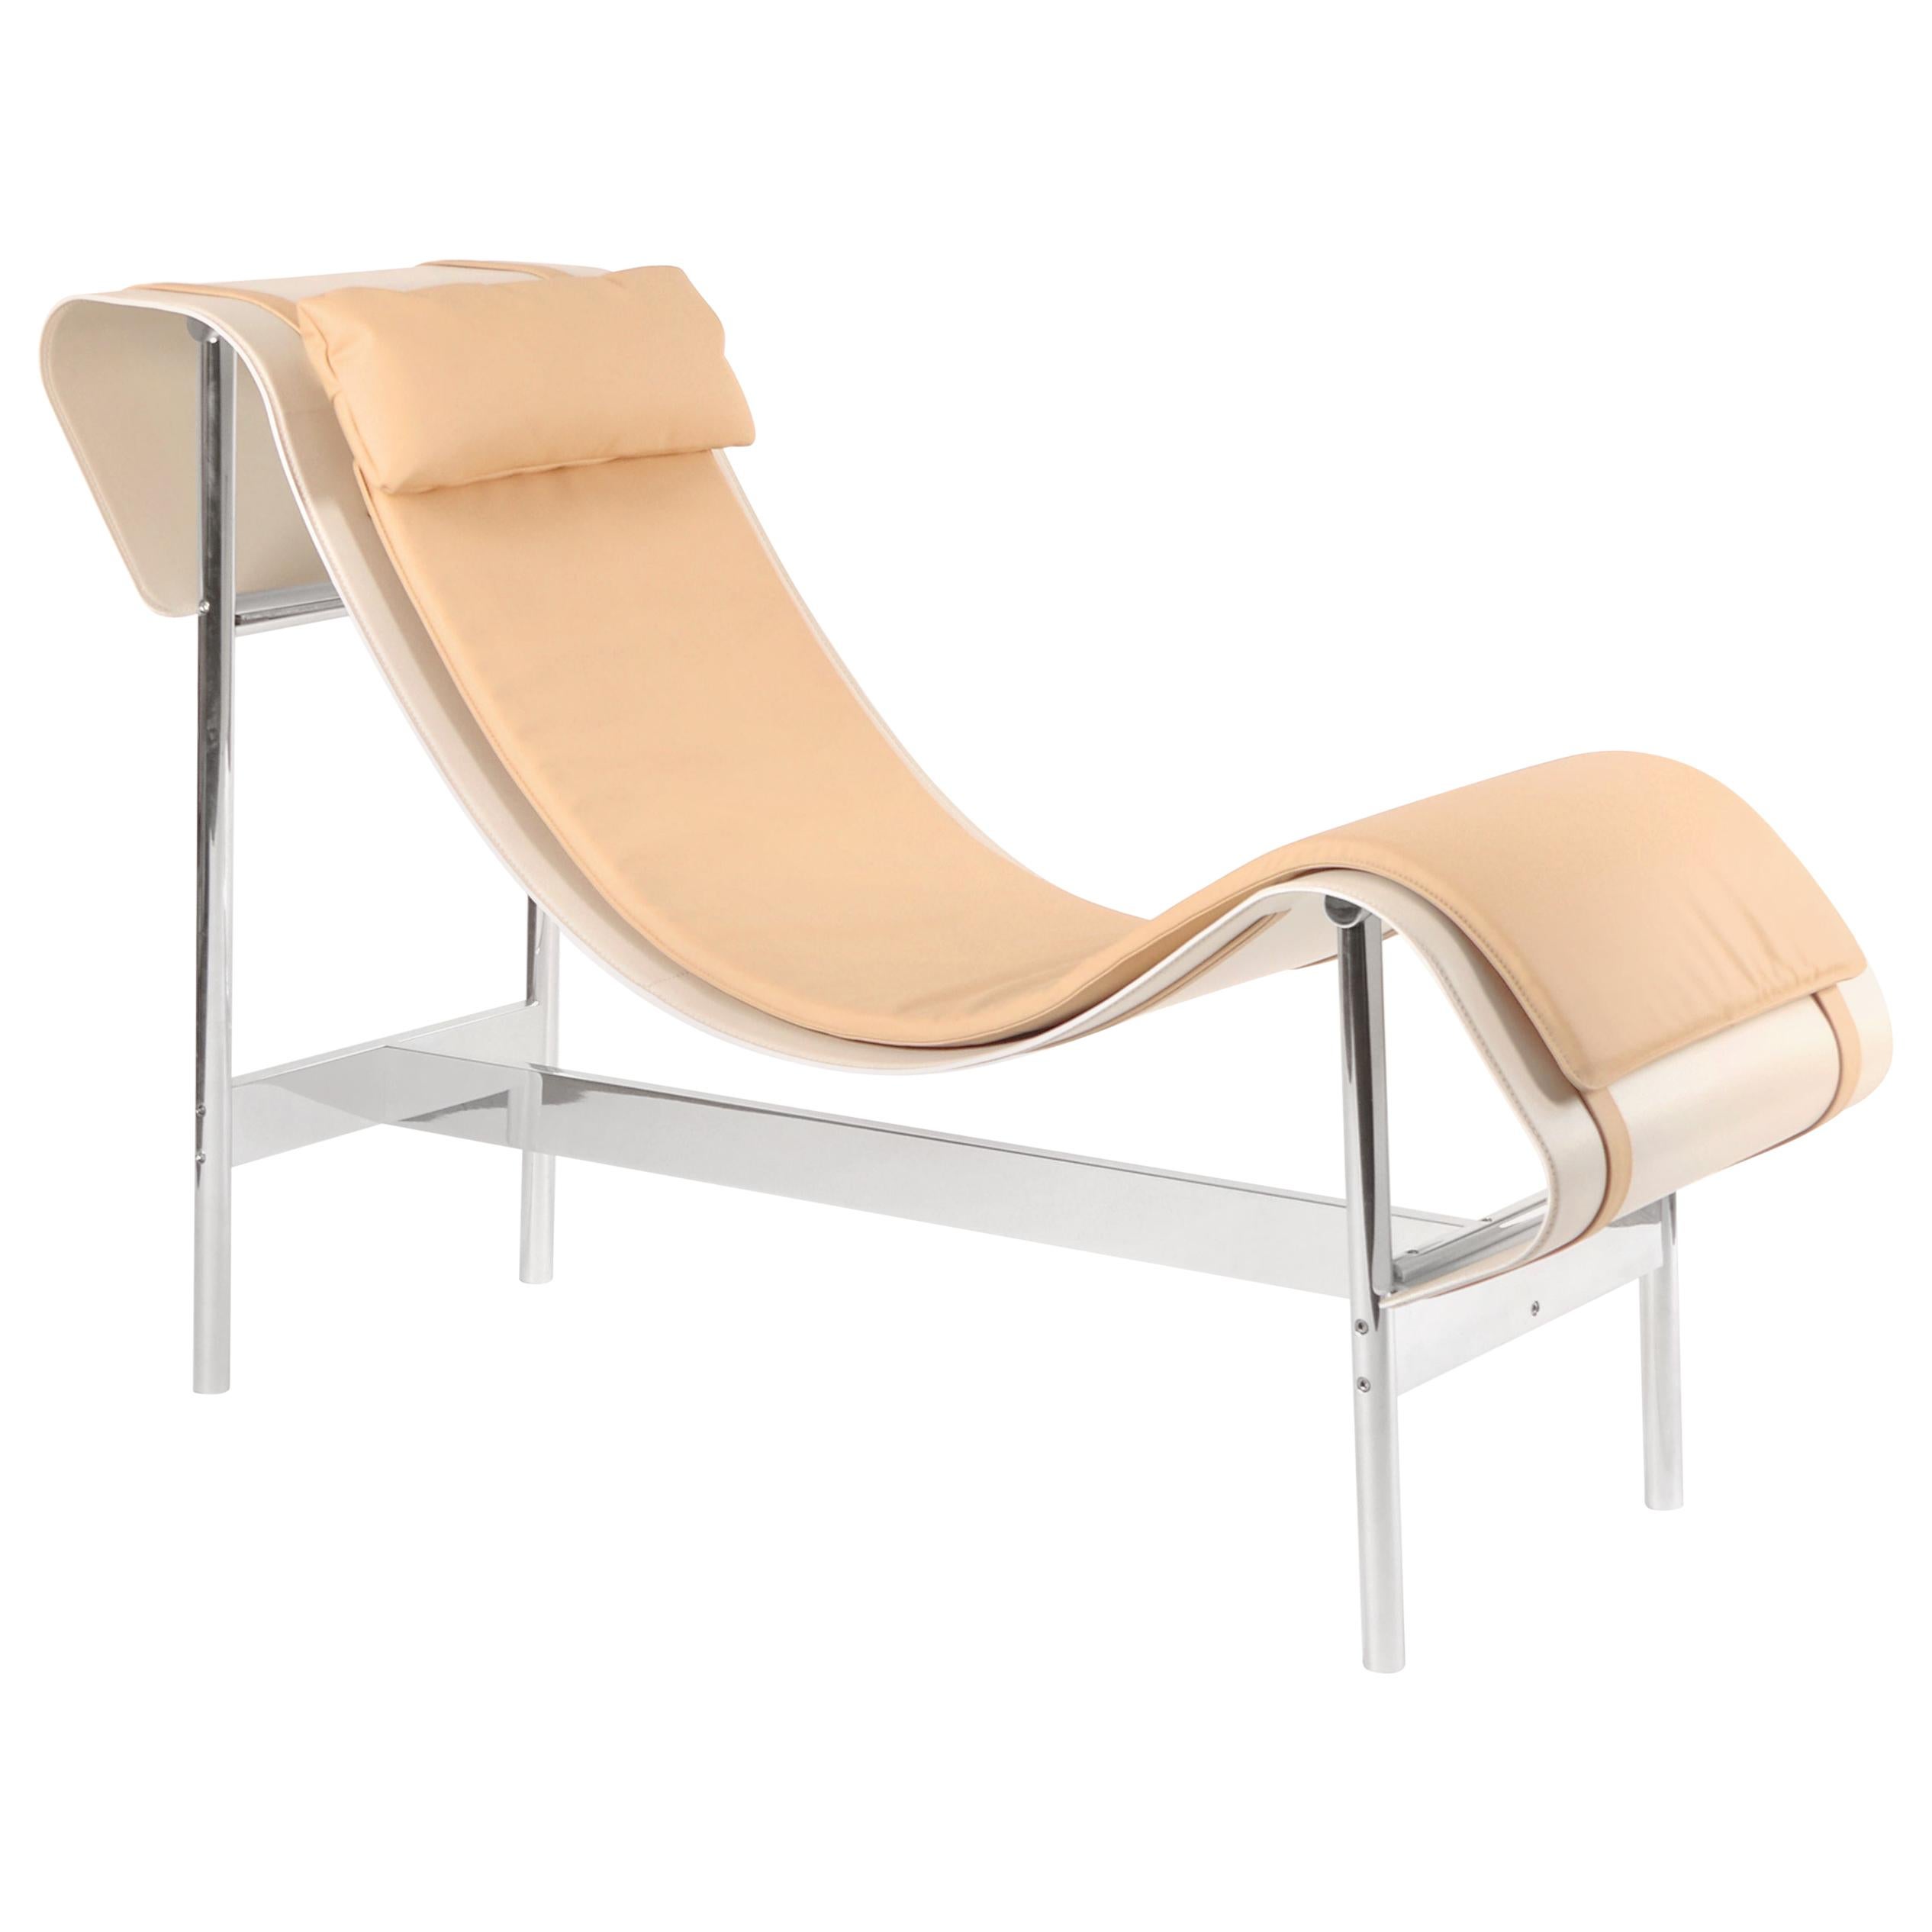 White Powder-Coated Steel Curved Leather Platform and Cushion Chaise Lounge